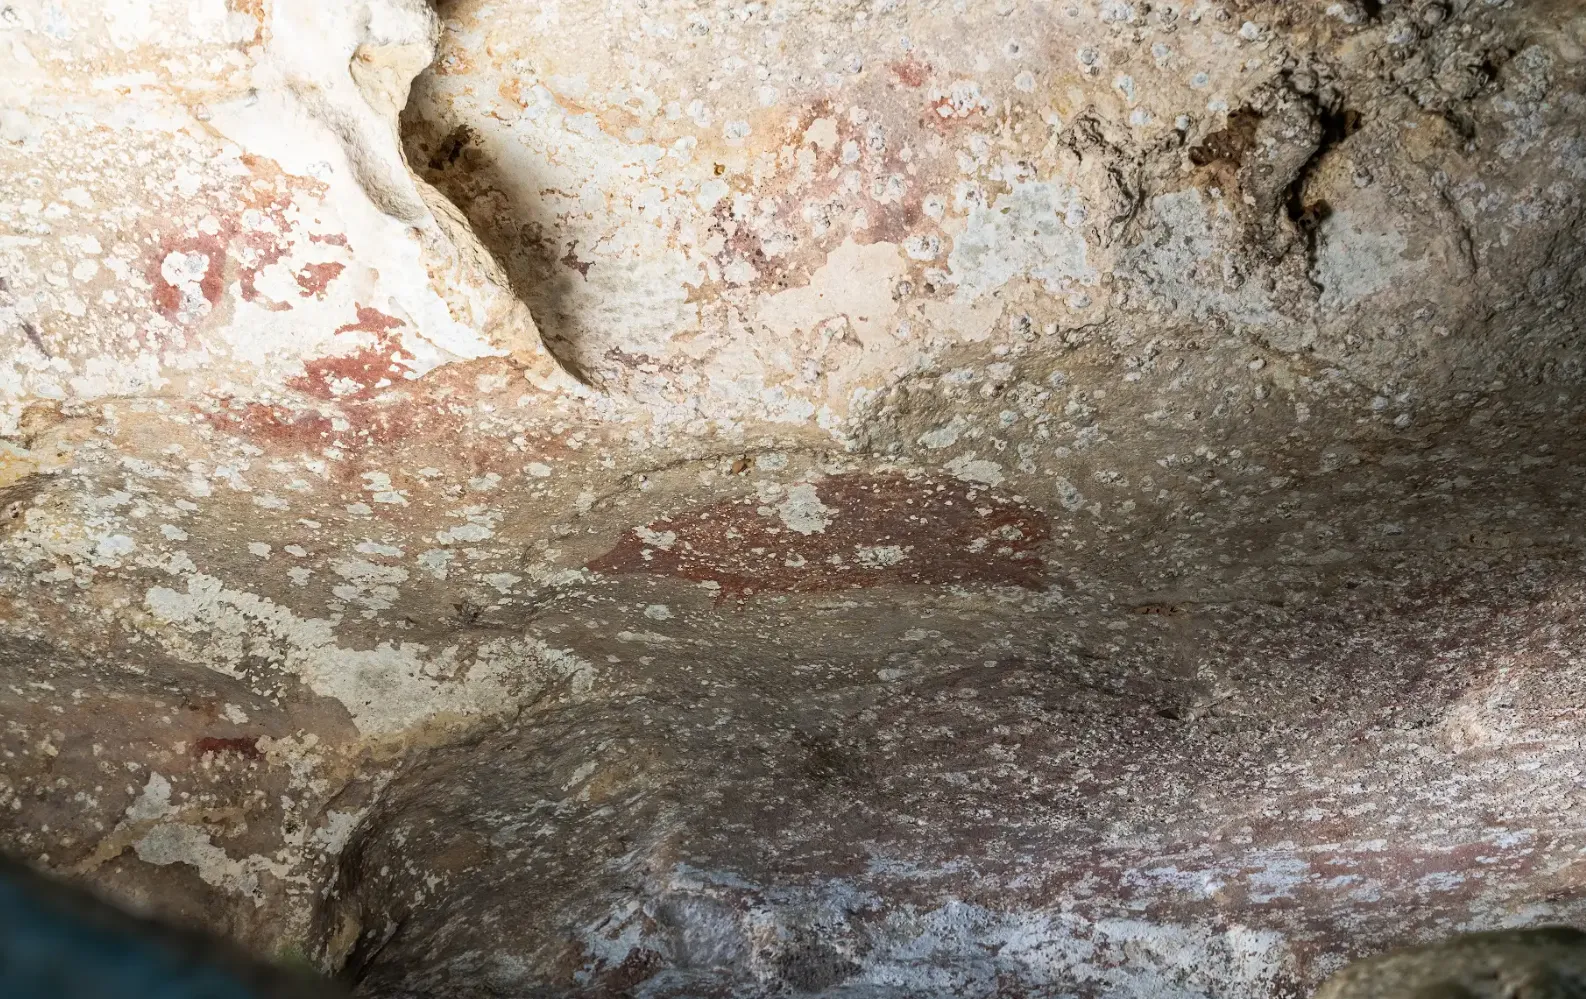 Photograph of red colored rock art that depicts small human figures, a wild pig and hand stencils